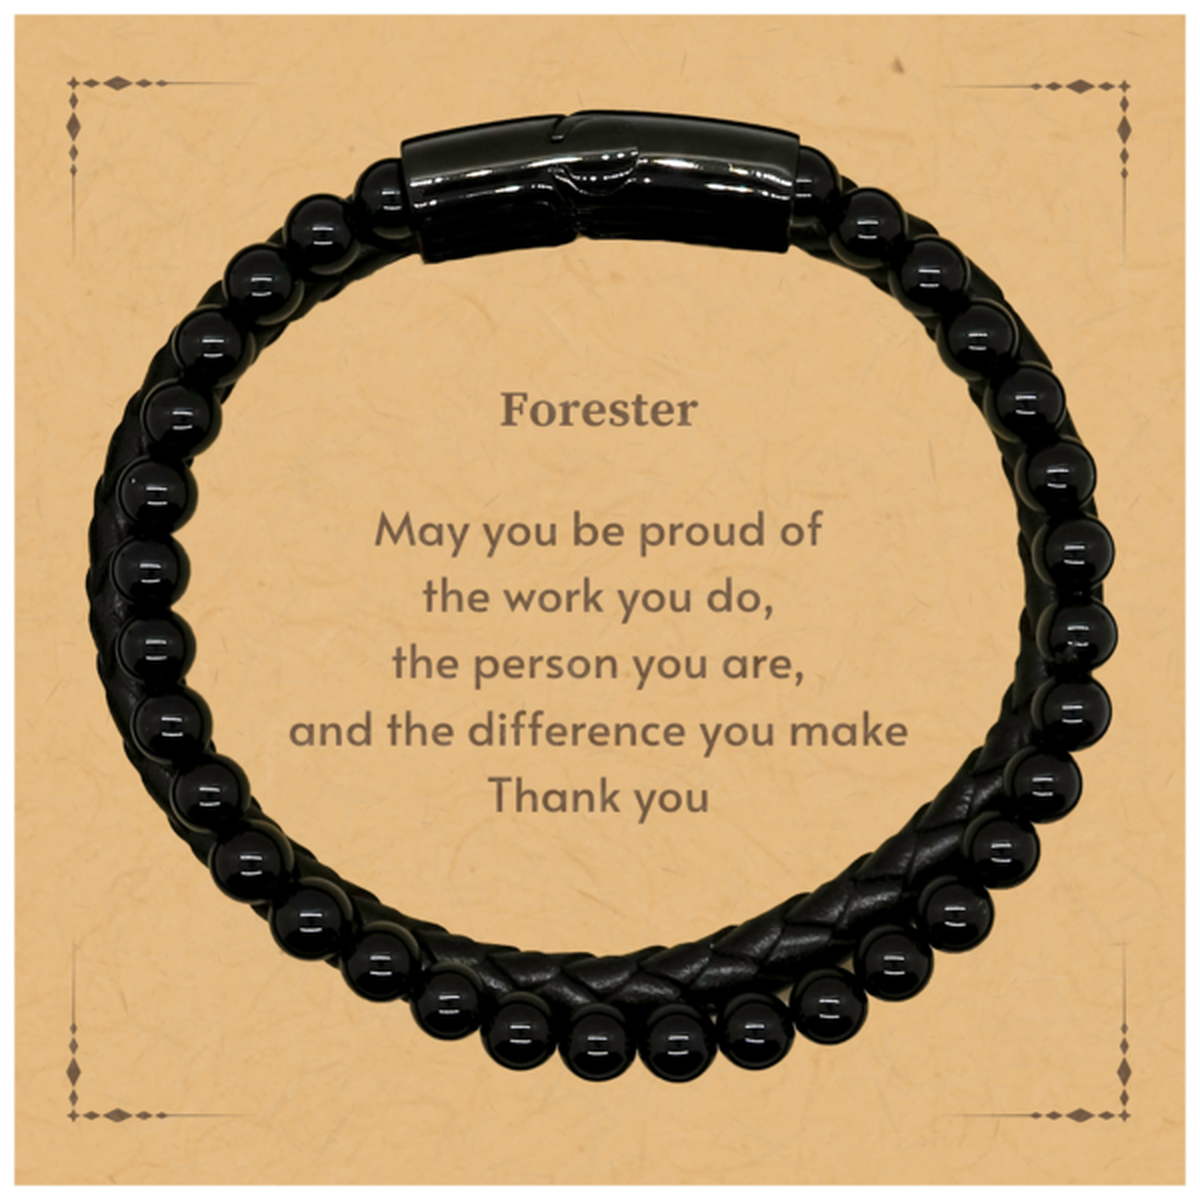 Heartwarming Stone Leather Bracelets Retirement Coworkers Gifts for Forester, Forester May You be proud of the work you do, the person you are Gifts for Boss Men Women Friends